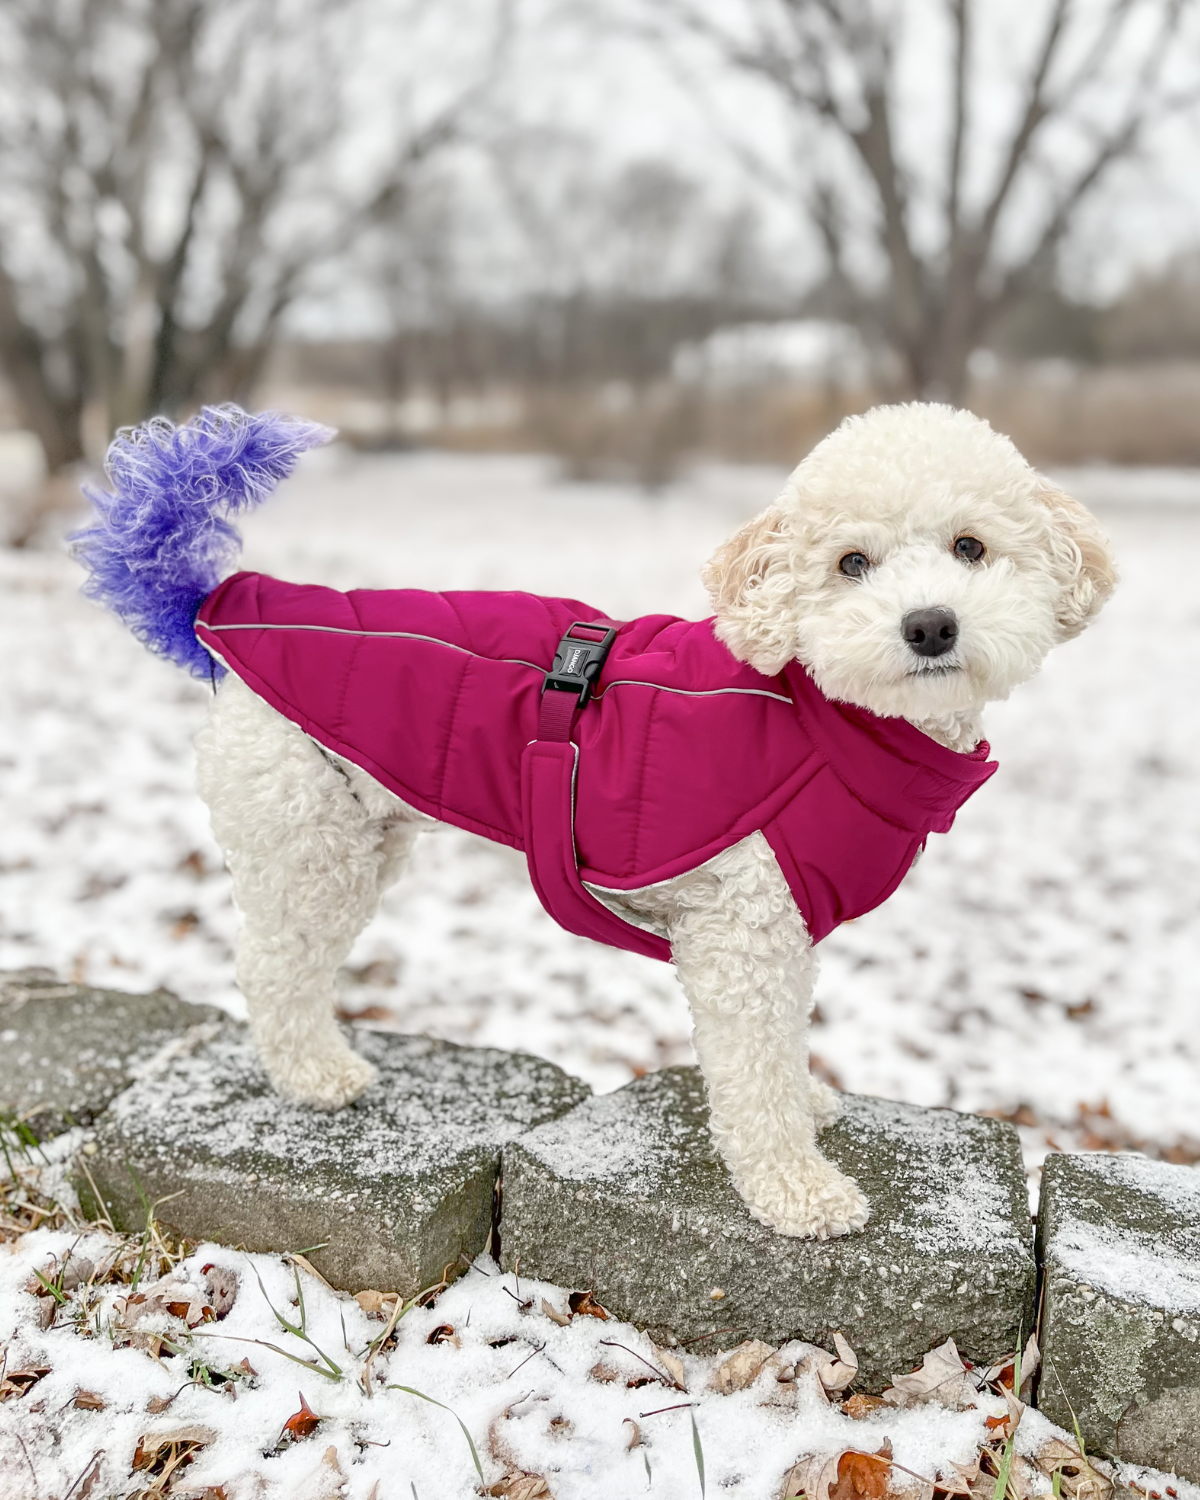 Designed for all winter weather, DJANGO's very warm and insulated winter dog coat will protect your dog during every cold weather outing and adventure. Coco the Cockapoo, featured here, has a 16 inch chest girth and 16 inch back length and wears size medium perfectly. - djangobrand.com